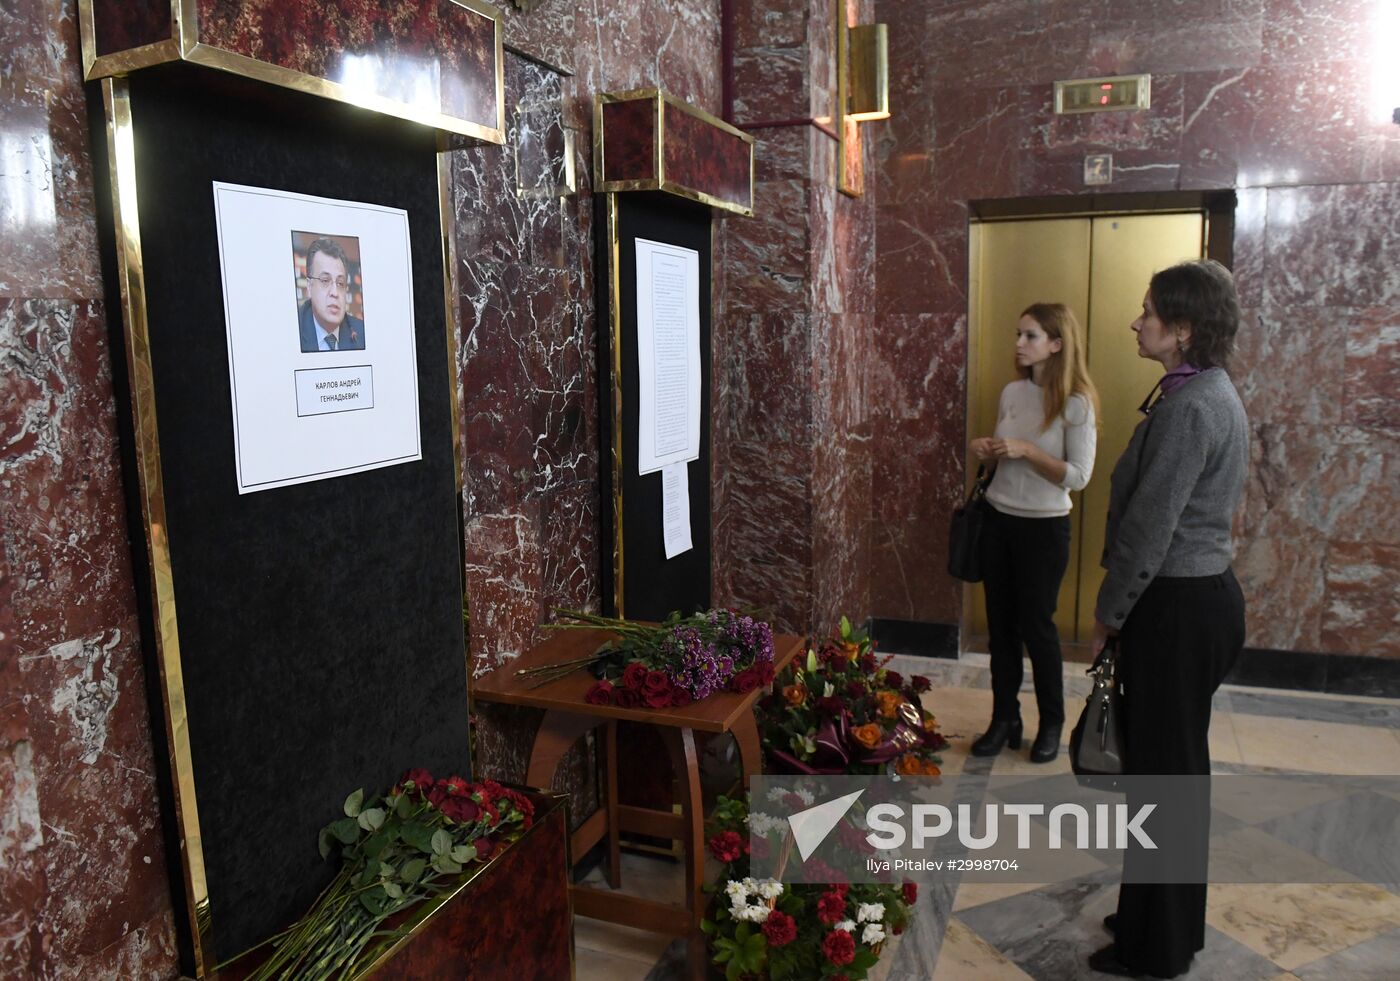 Moscow residents bring flowers to Russian Foreign Ministry in memory of slain Ambassador Karlov